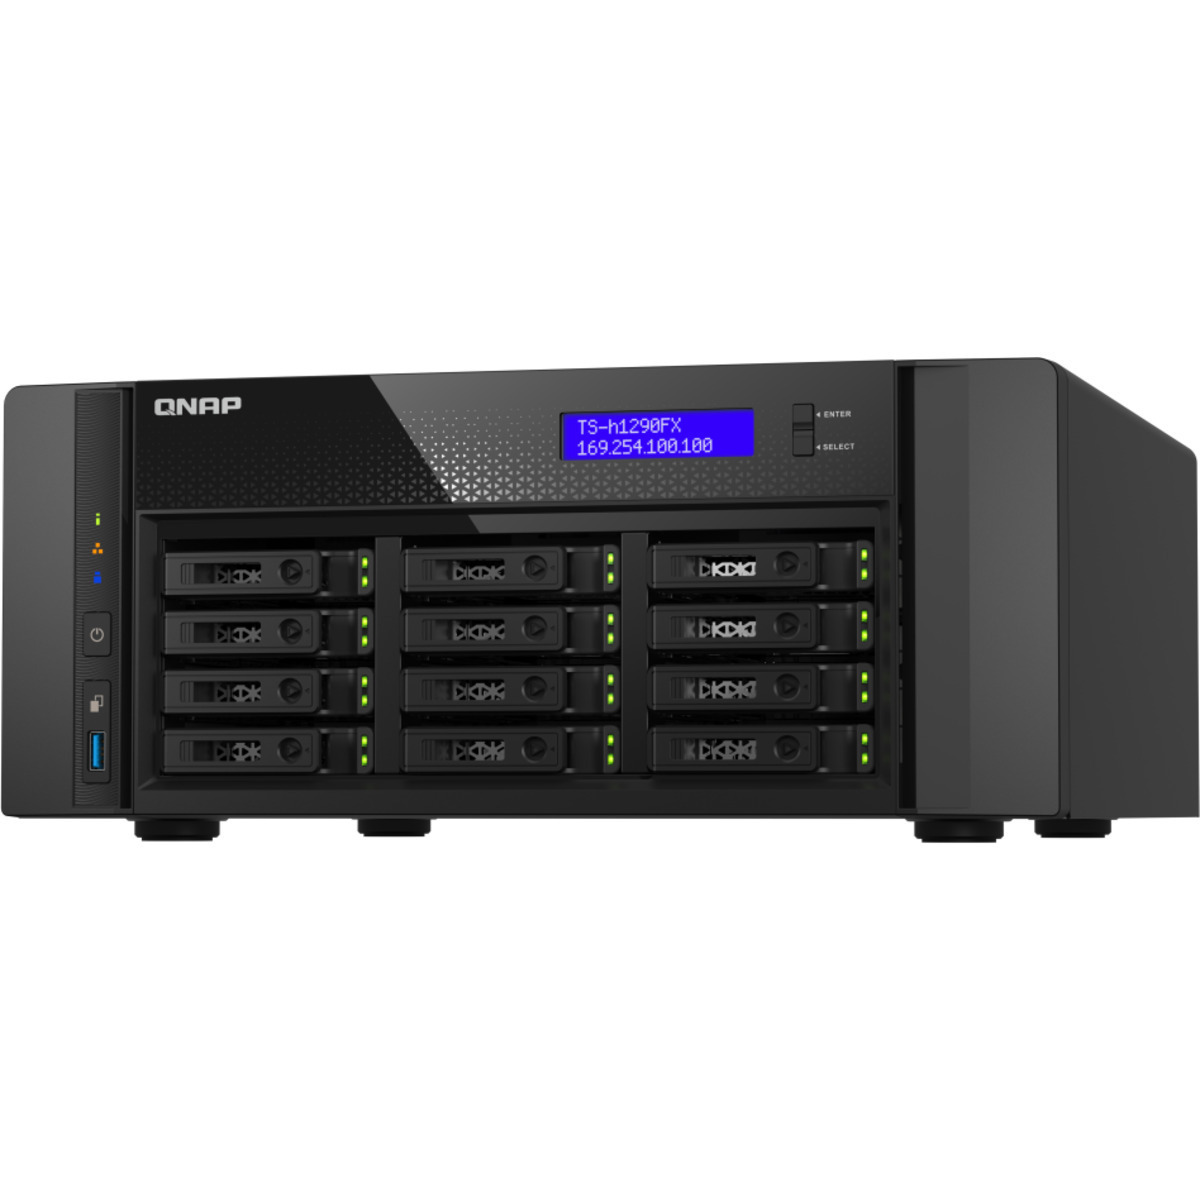 QNAP TS-h1290FX-7232P NAS - Network Attached Storage Device Burn-In Tested Configurations